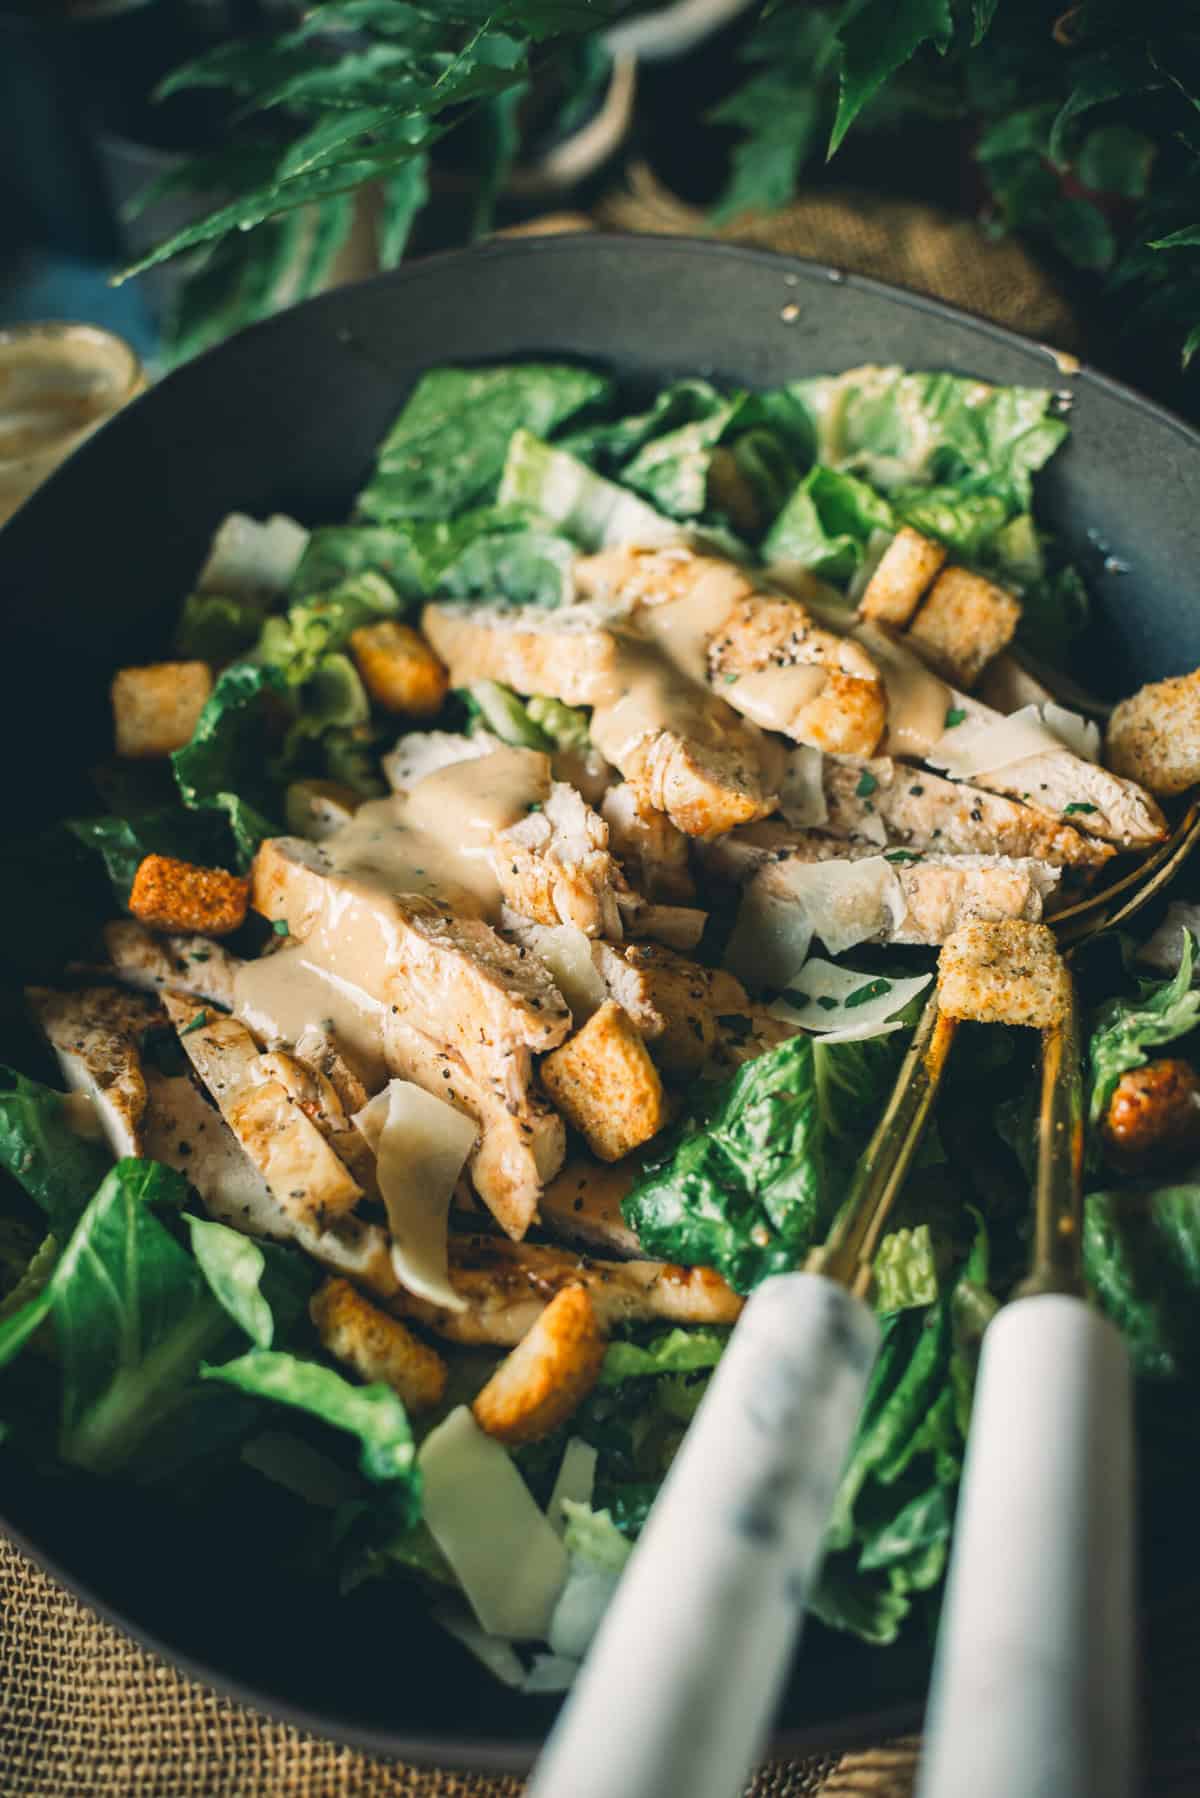 A bowl of Caesar salad with sliced grilled chicken, croutons, grated cheese, and dressing.